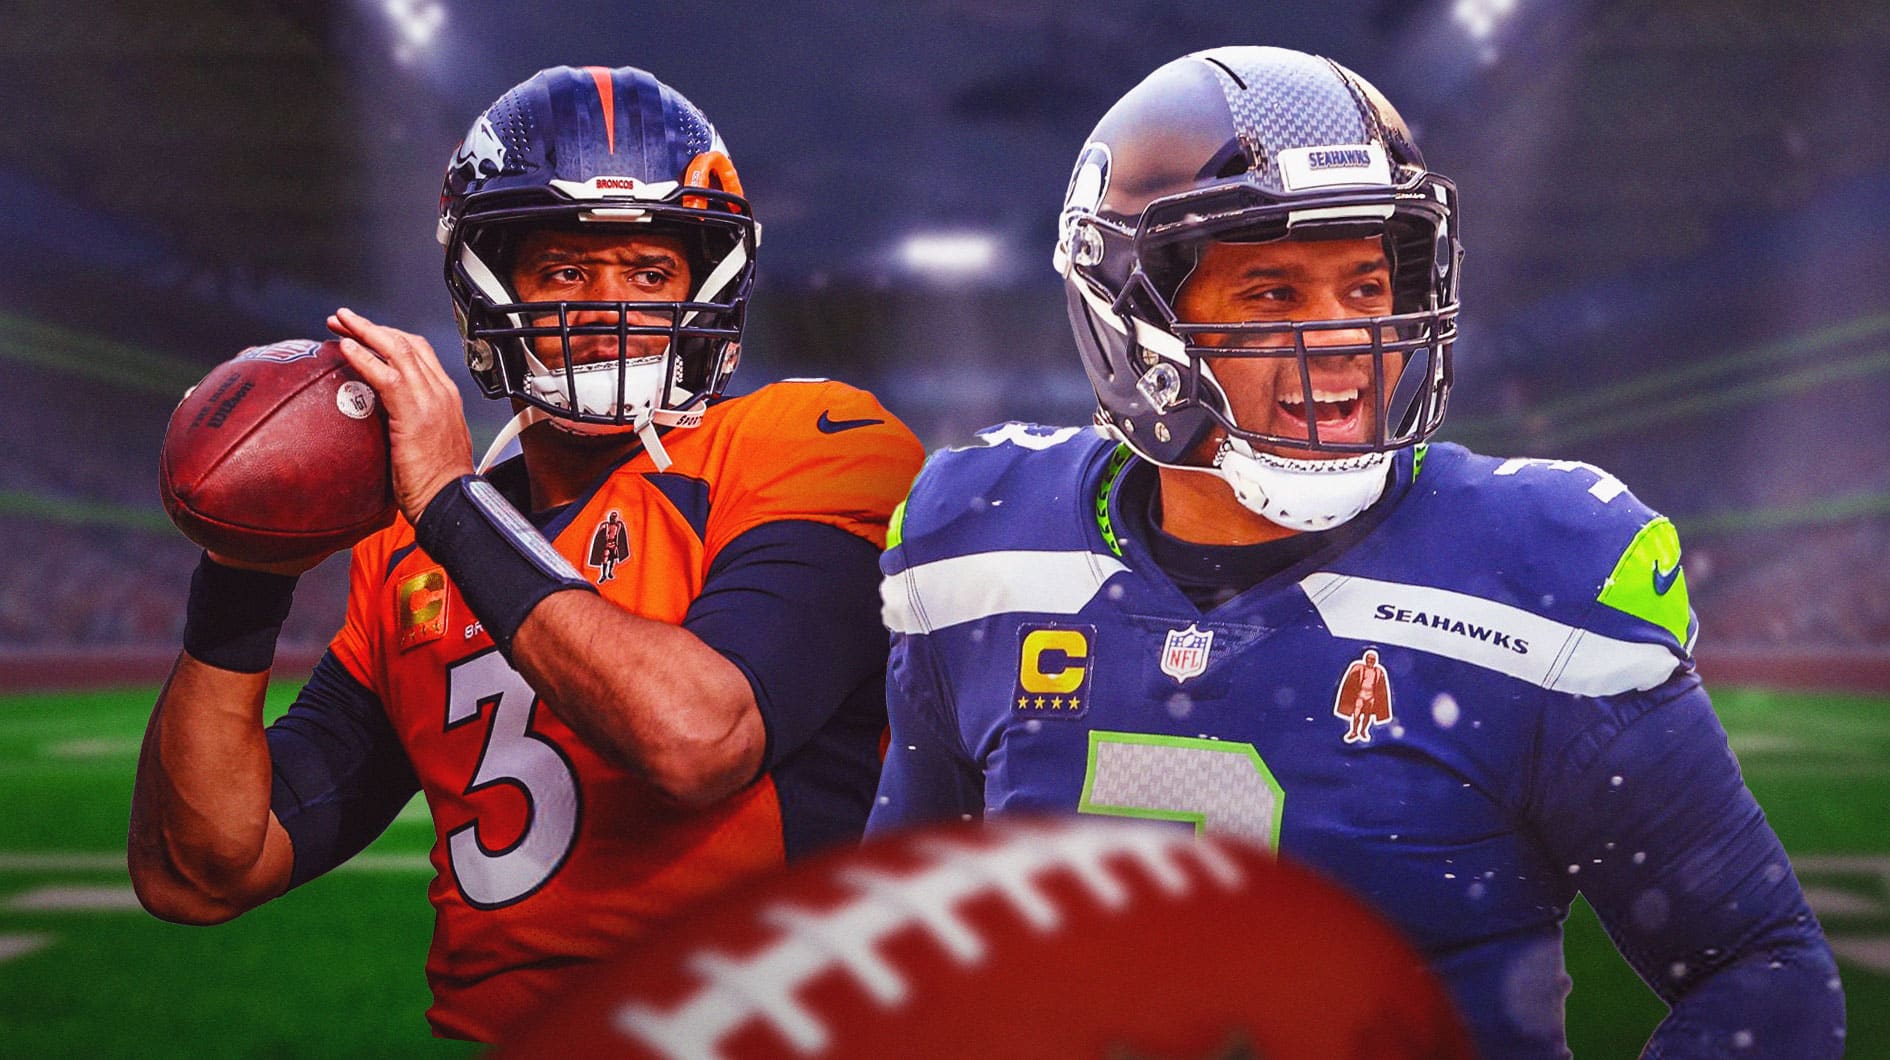 Russell Wilson playing for the Denver Broncos and the Seattle Seahawks.